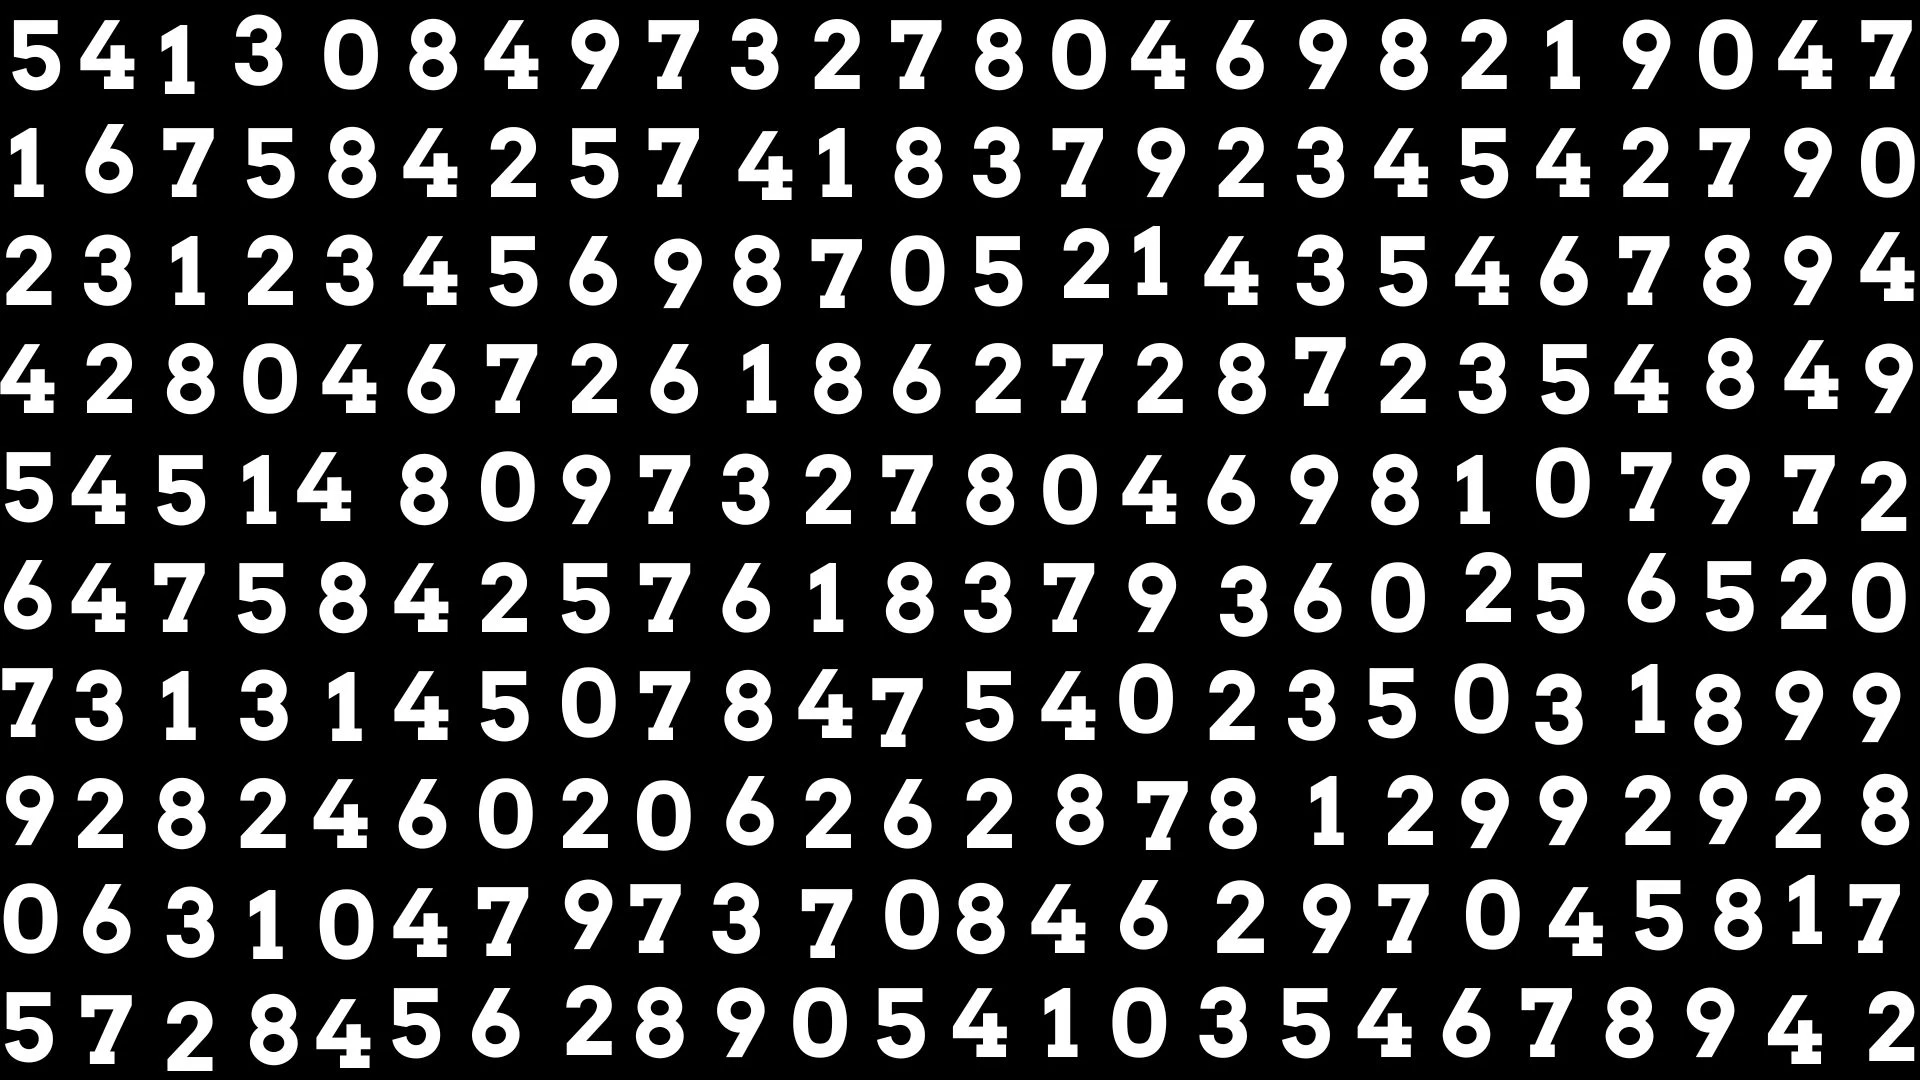 Observation Brain Challenge: If you have Hawk Eyes Find the Number 9009 in 15 Secs